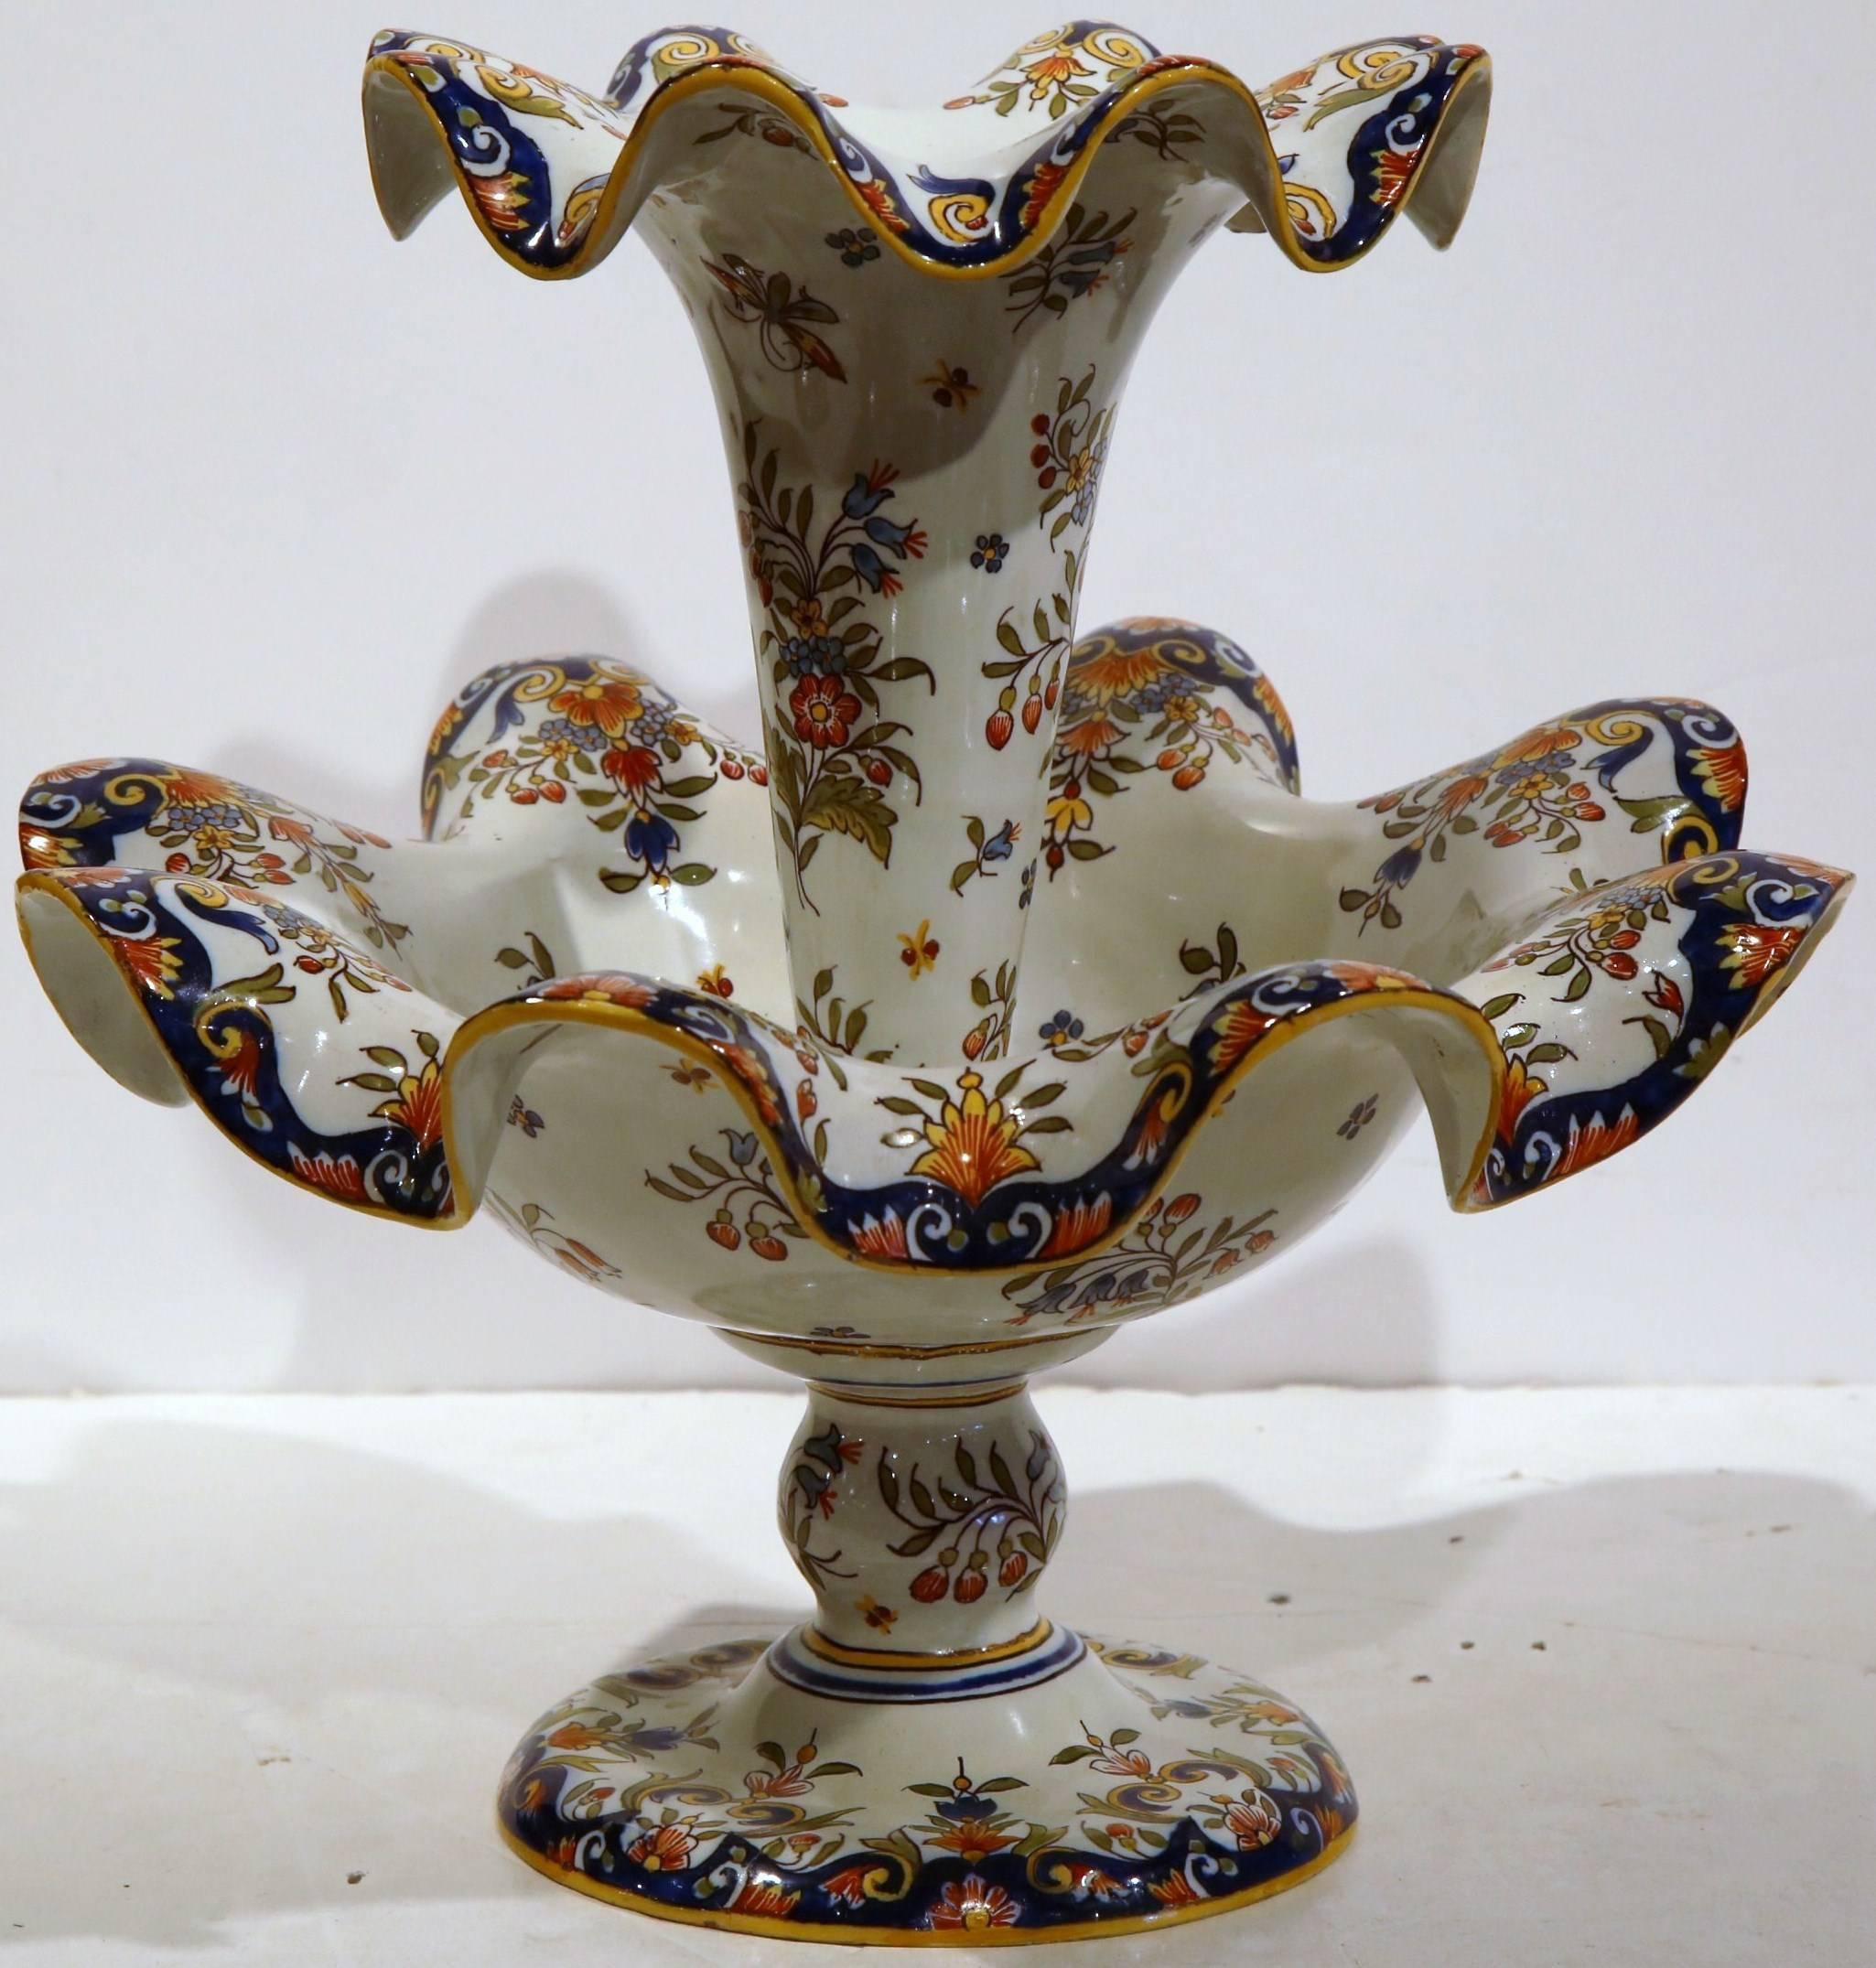 This large antique ceramic vase was created in Rouen, France, circa 1920. The two-tier centerpiece sits on a round base and features hand painted floral motifs in the yellow and blue palette. The ceramic flower holder is in excellent condition with